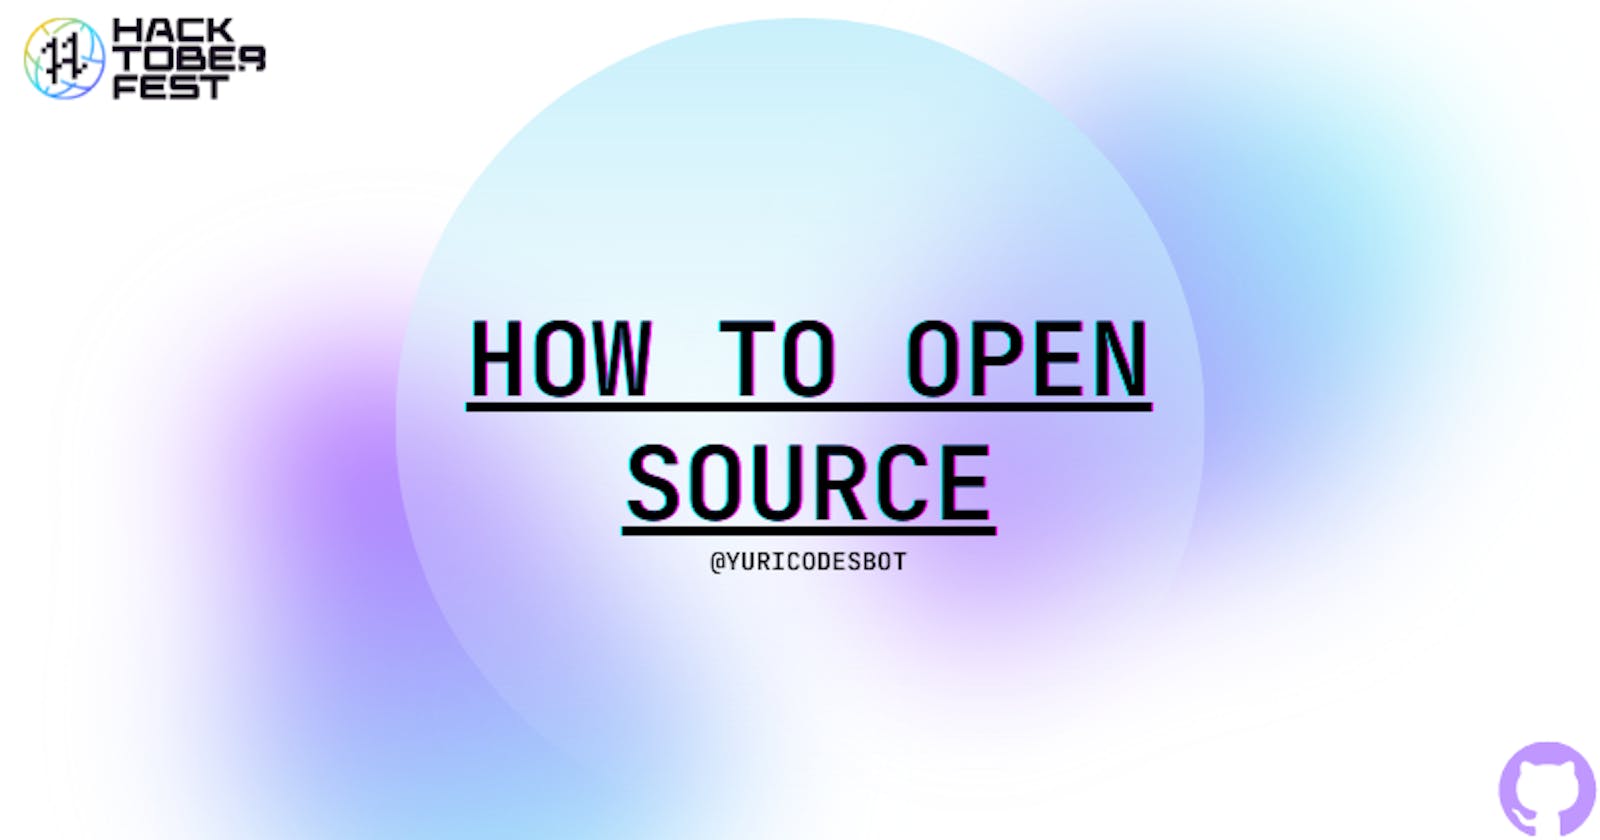 The ultimate contribution guide to Open Source